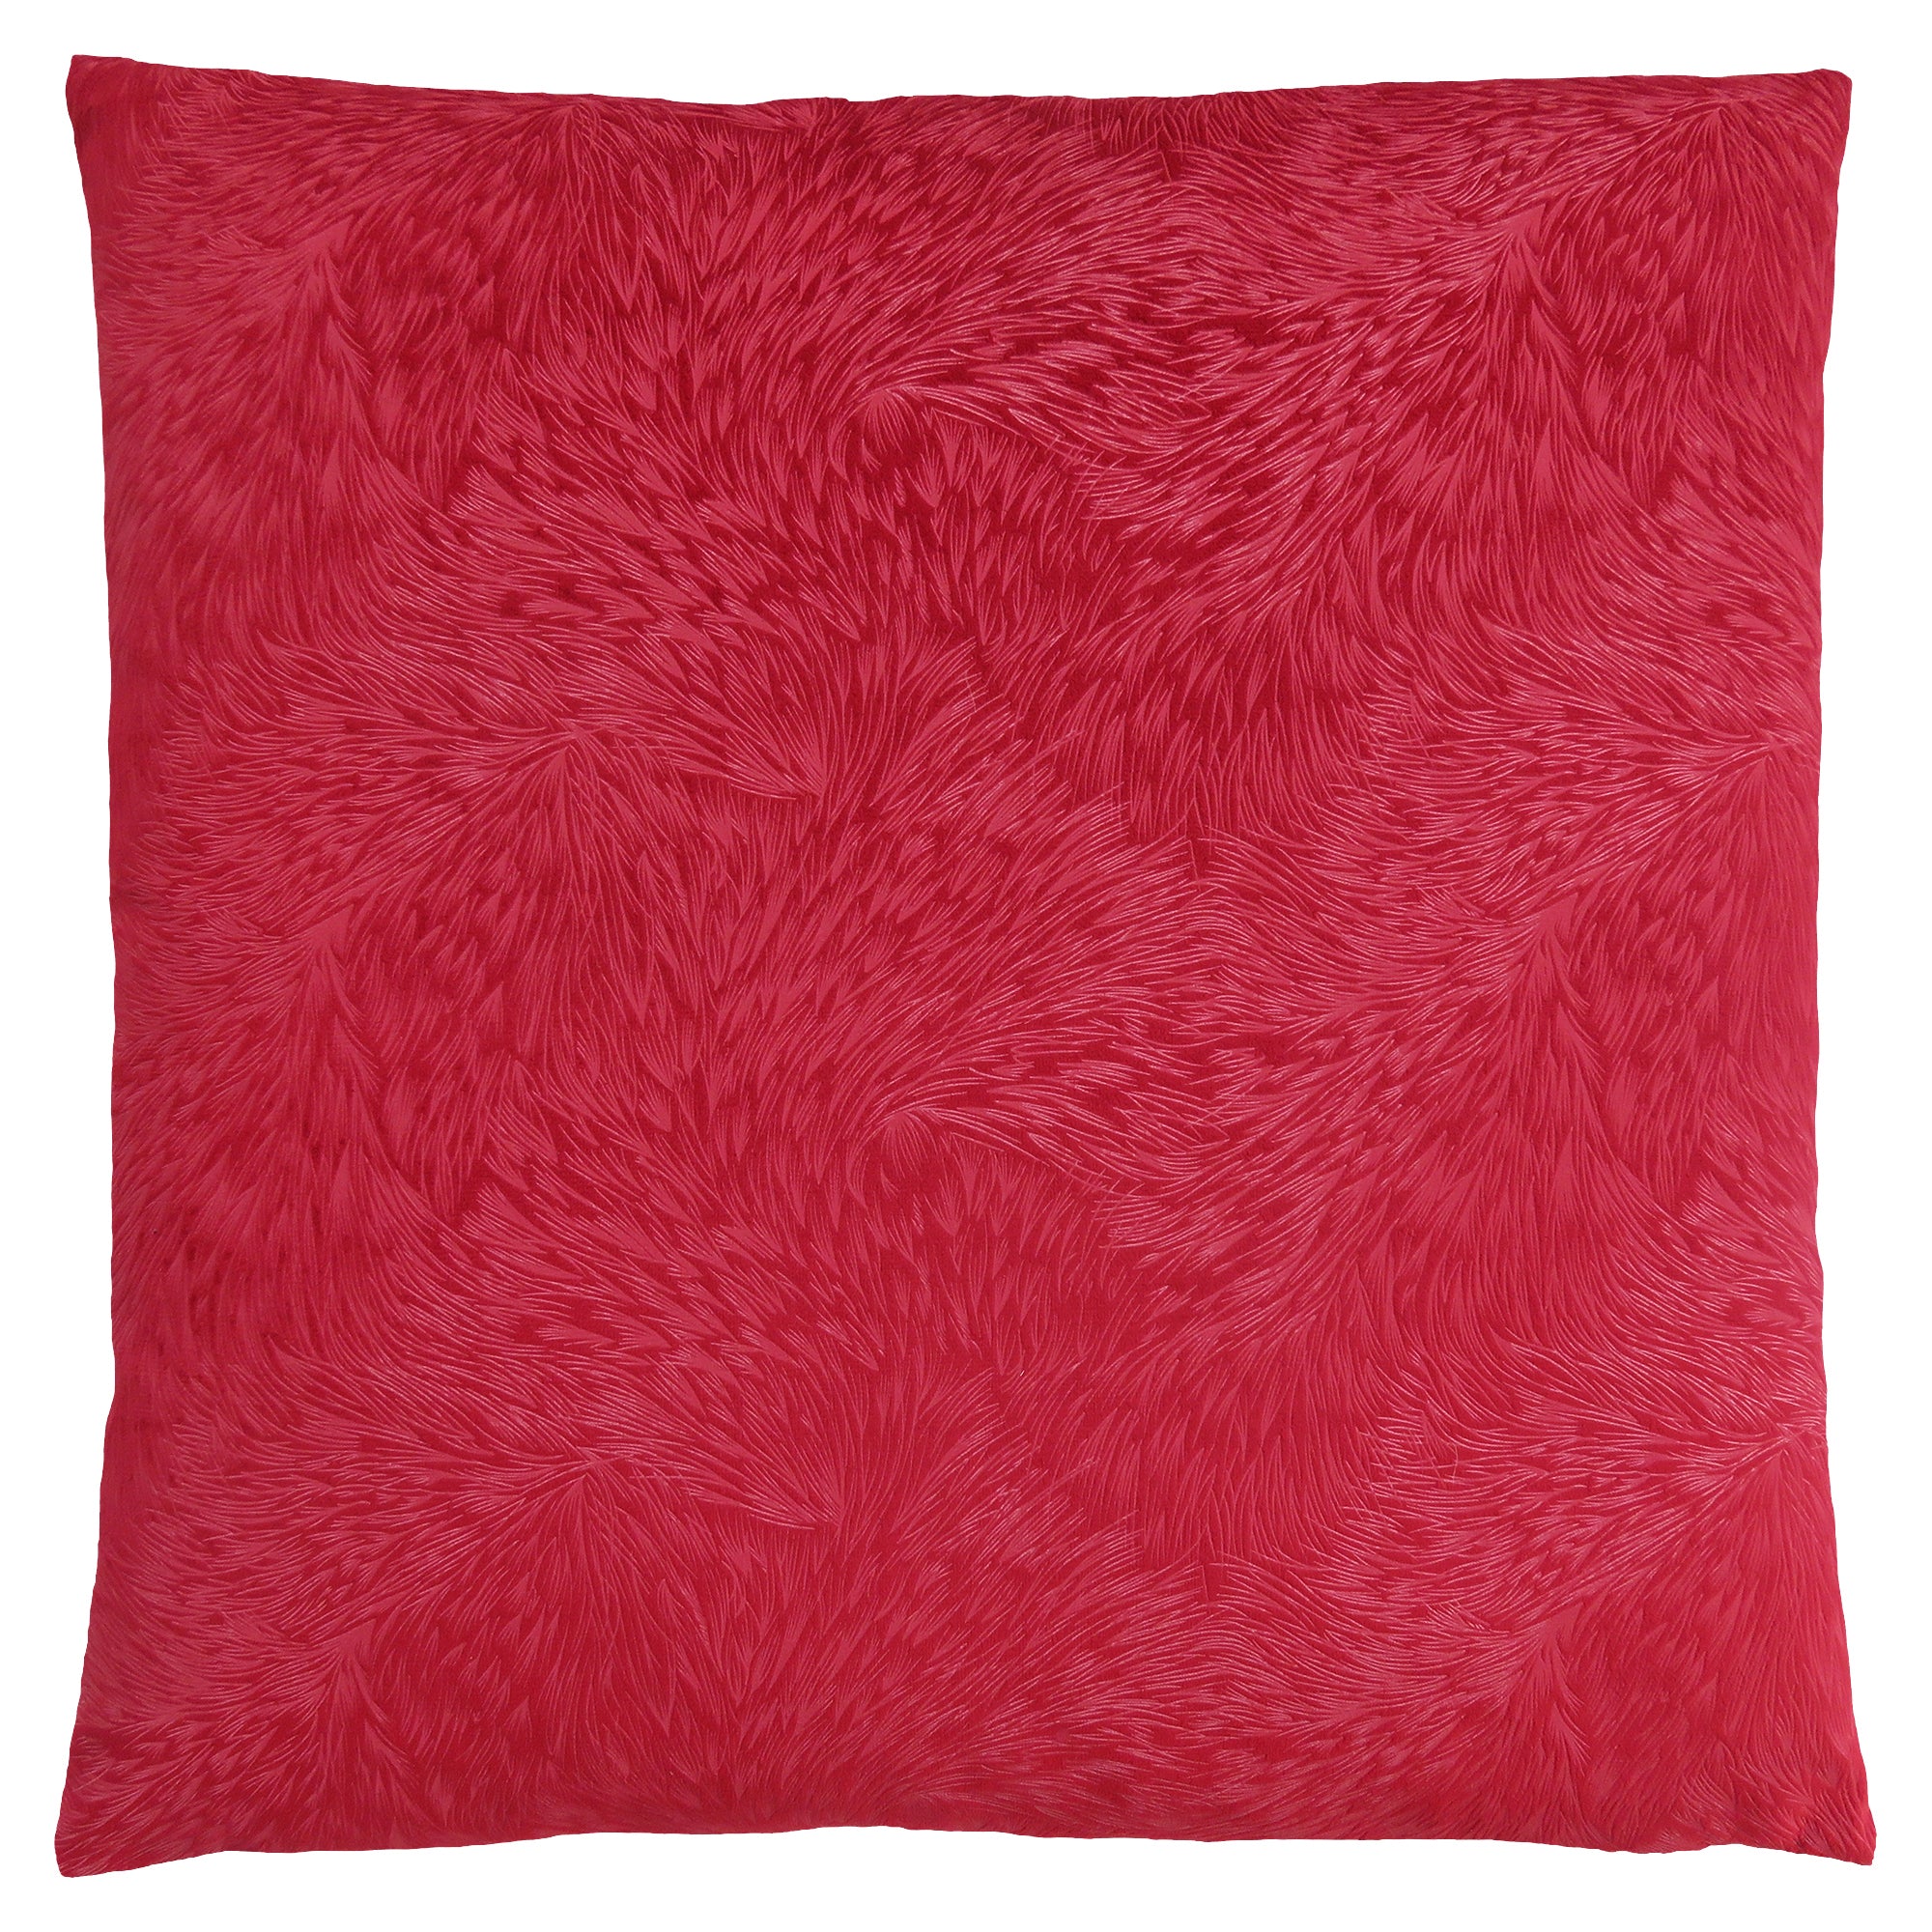 Pillow - 18X 18 / Red Feathered Velvet / 1Pc